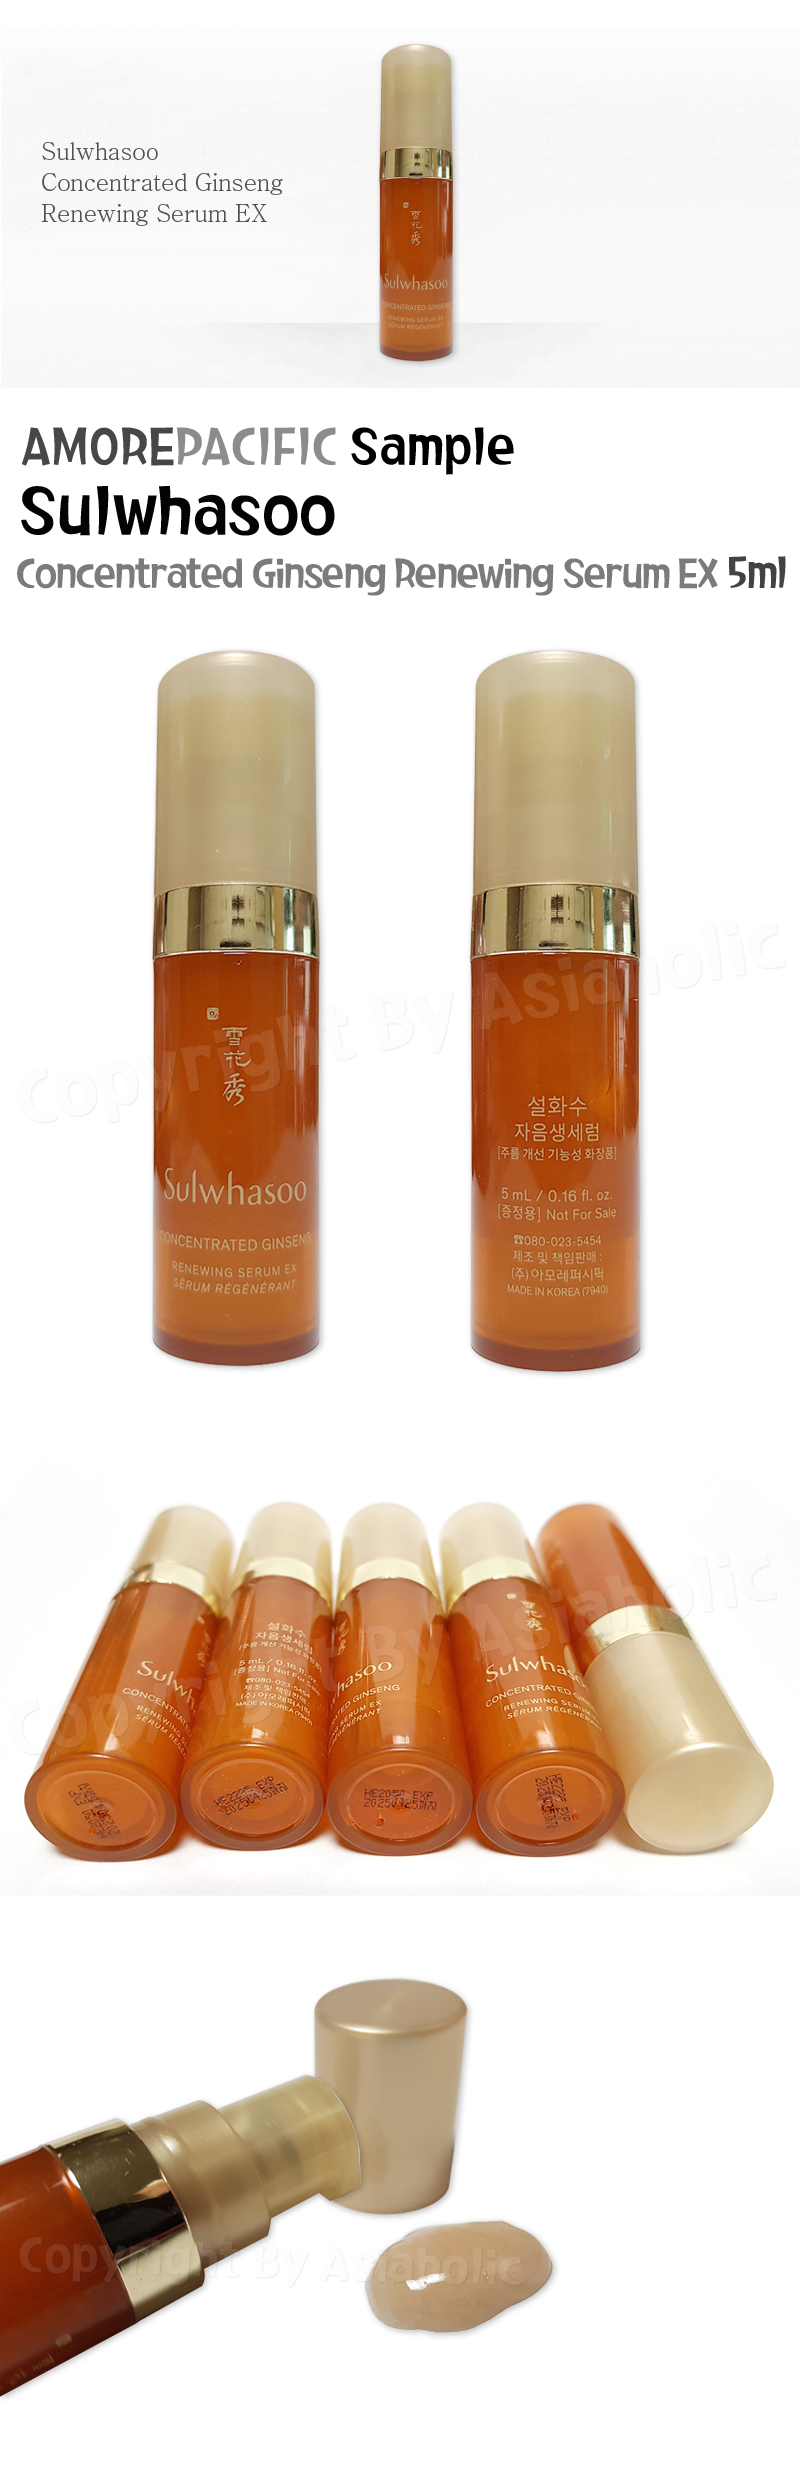 Sulwhasoo Concentrated Ginseng Renewing Serum EX 5ml x 5pcs (25ml) Newest Version